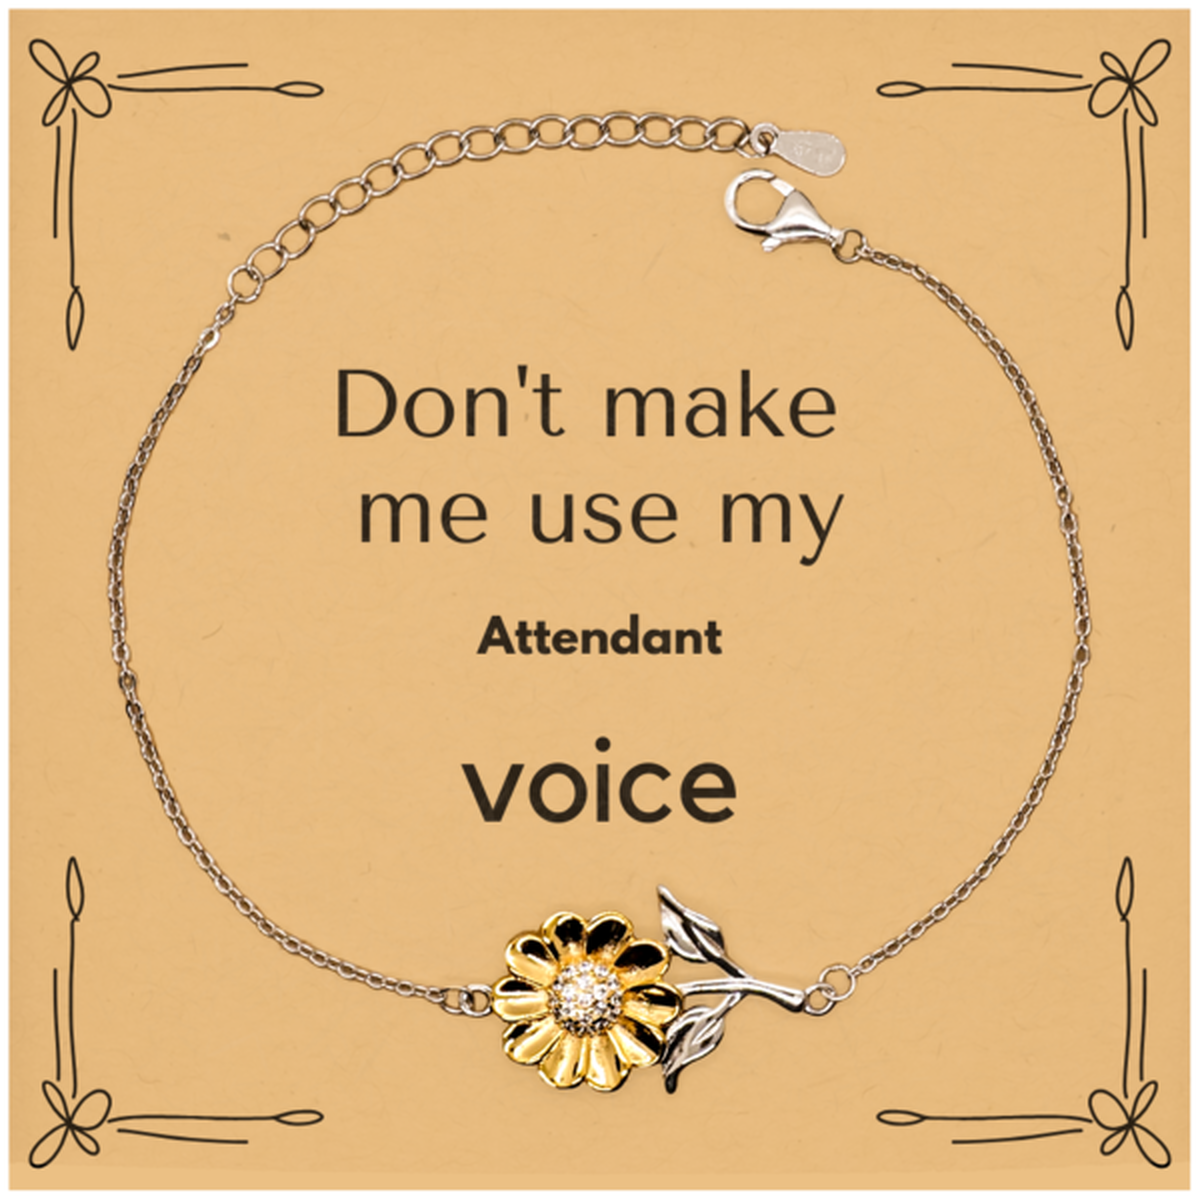 Don't make me use my Attendant voice, Sarcasm Attendant Card Gifts, Christmas Attendant Sunflower Bracelet Birthday Unique Gifts For Attendant Coworkers, Men, Women, Colleague, Friends